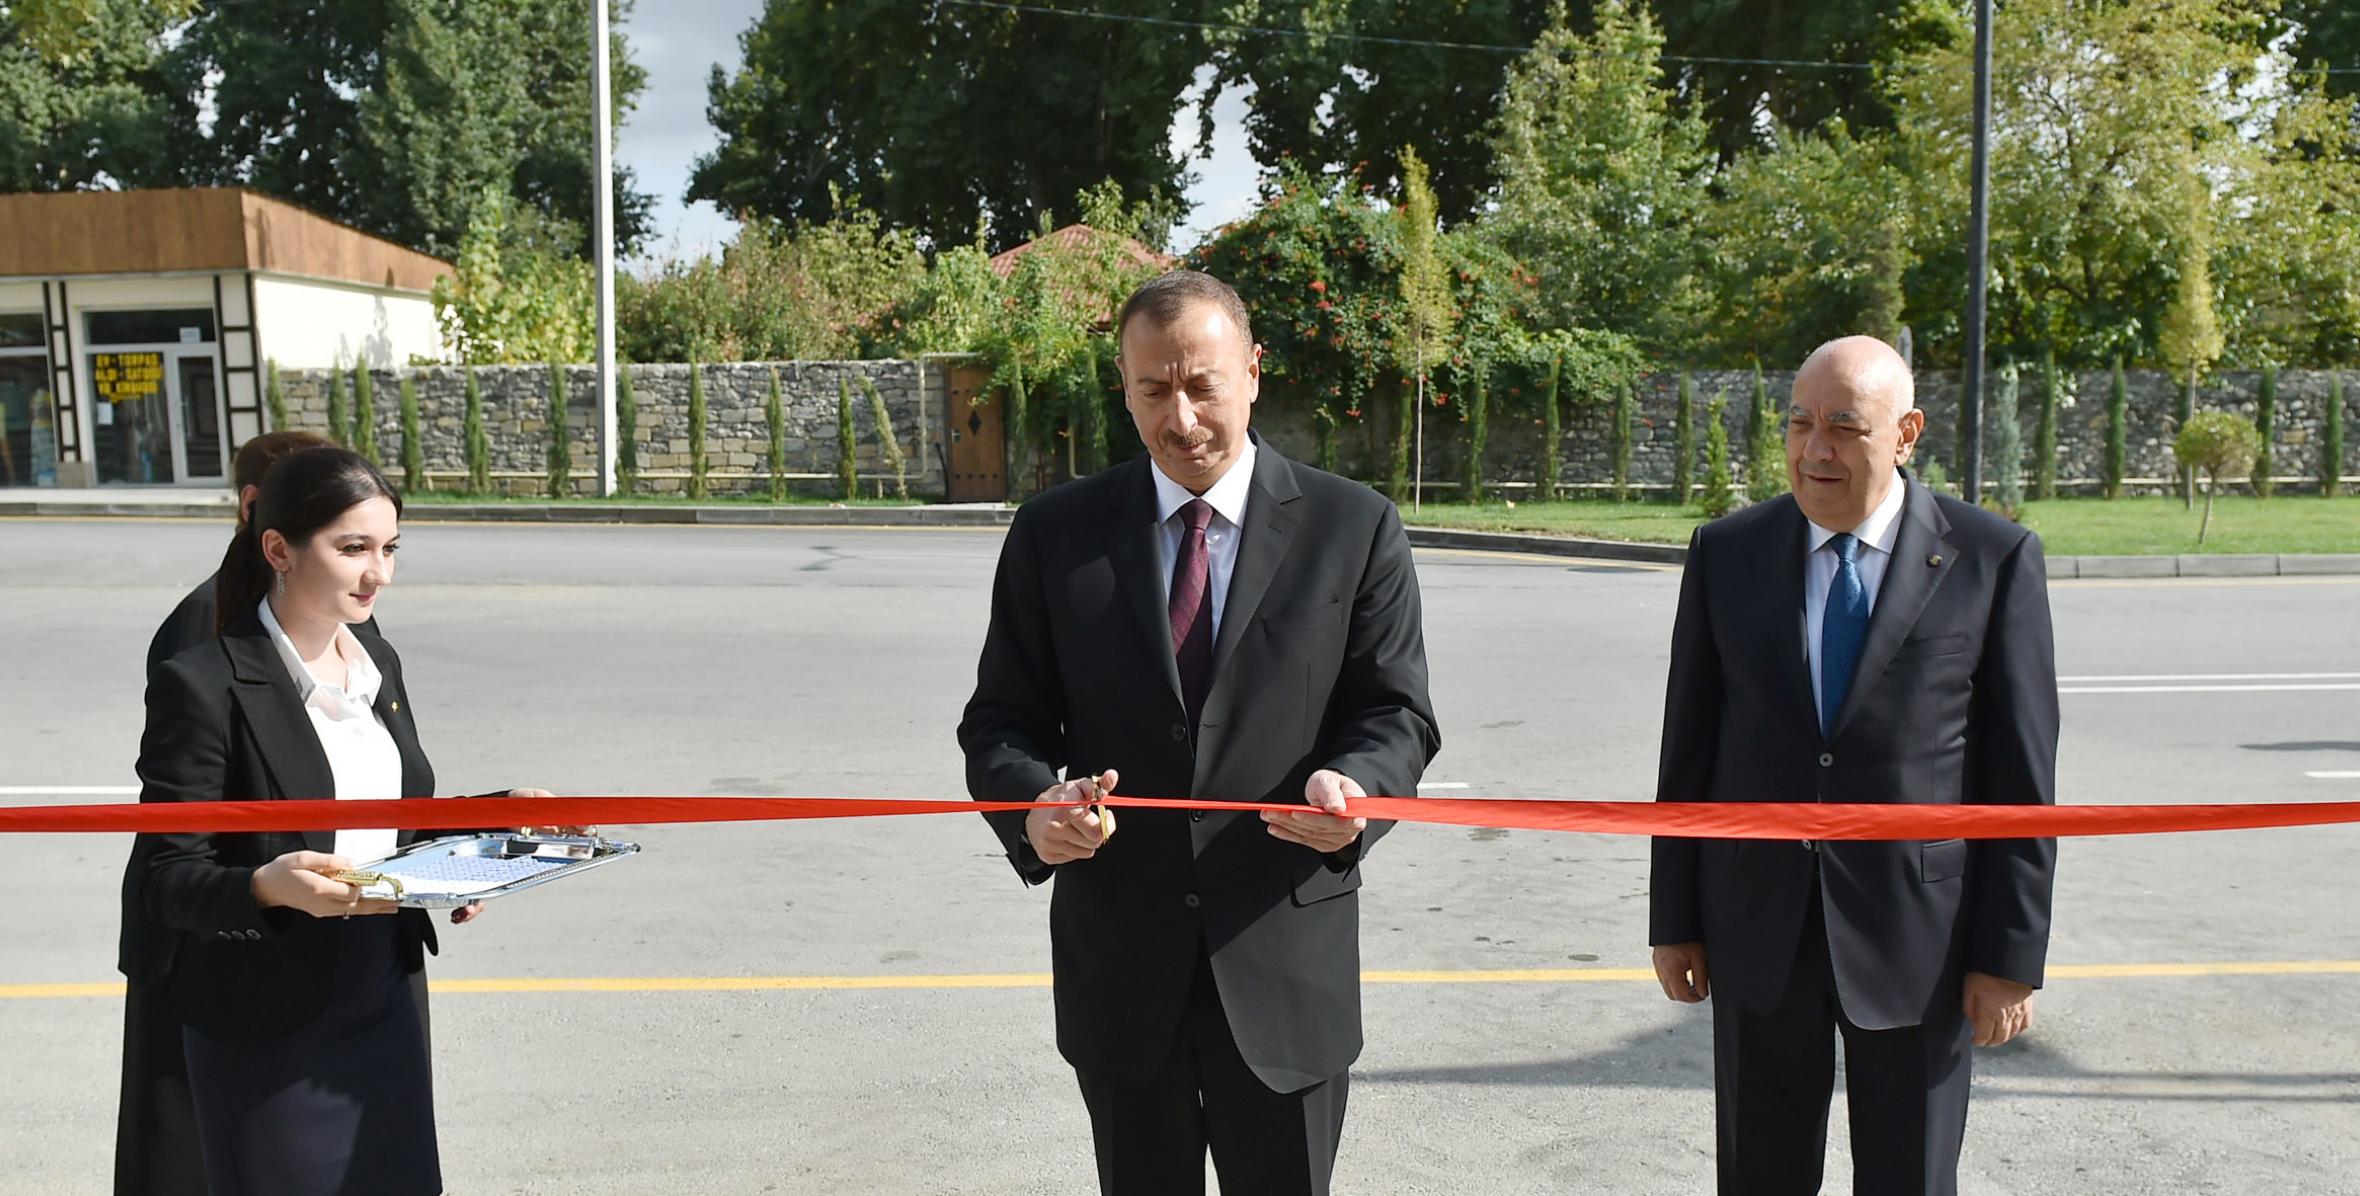 Ilham Aliyev attended the opening of an office building of Ismayilli District branch of the New Azerbaijan Party